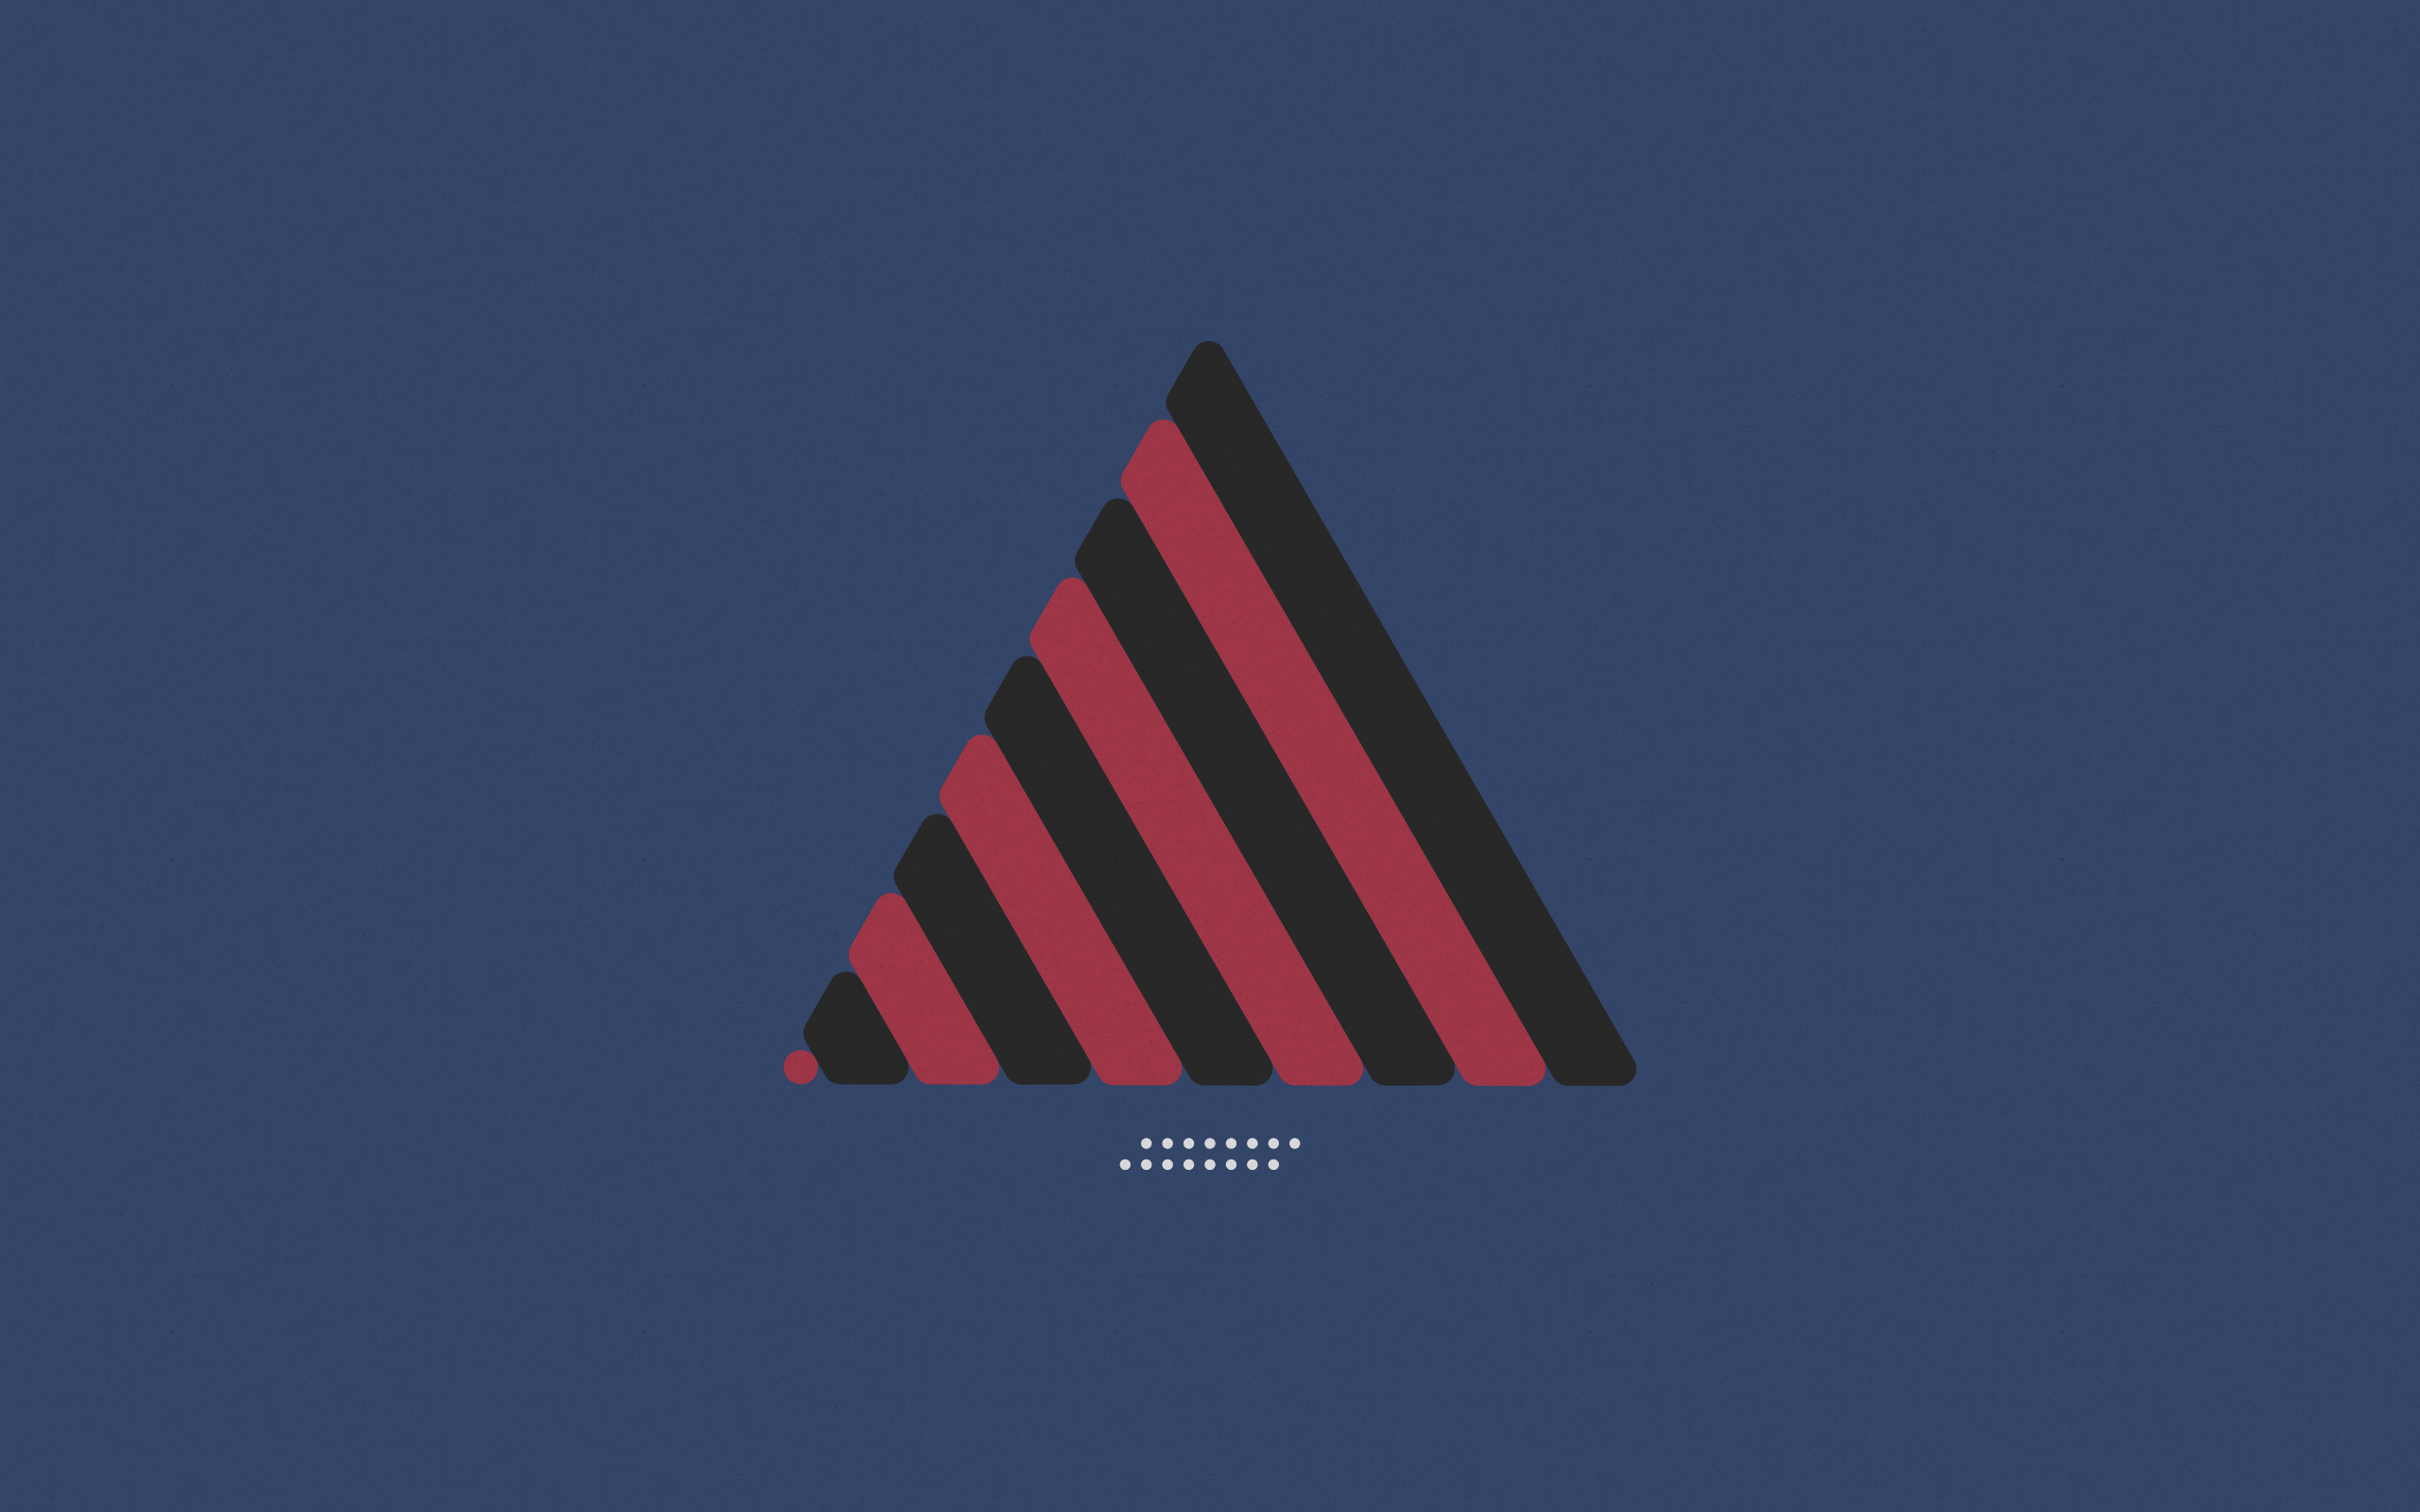 Iso50 Inspired Triangle Wallpaper